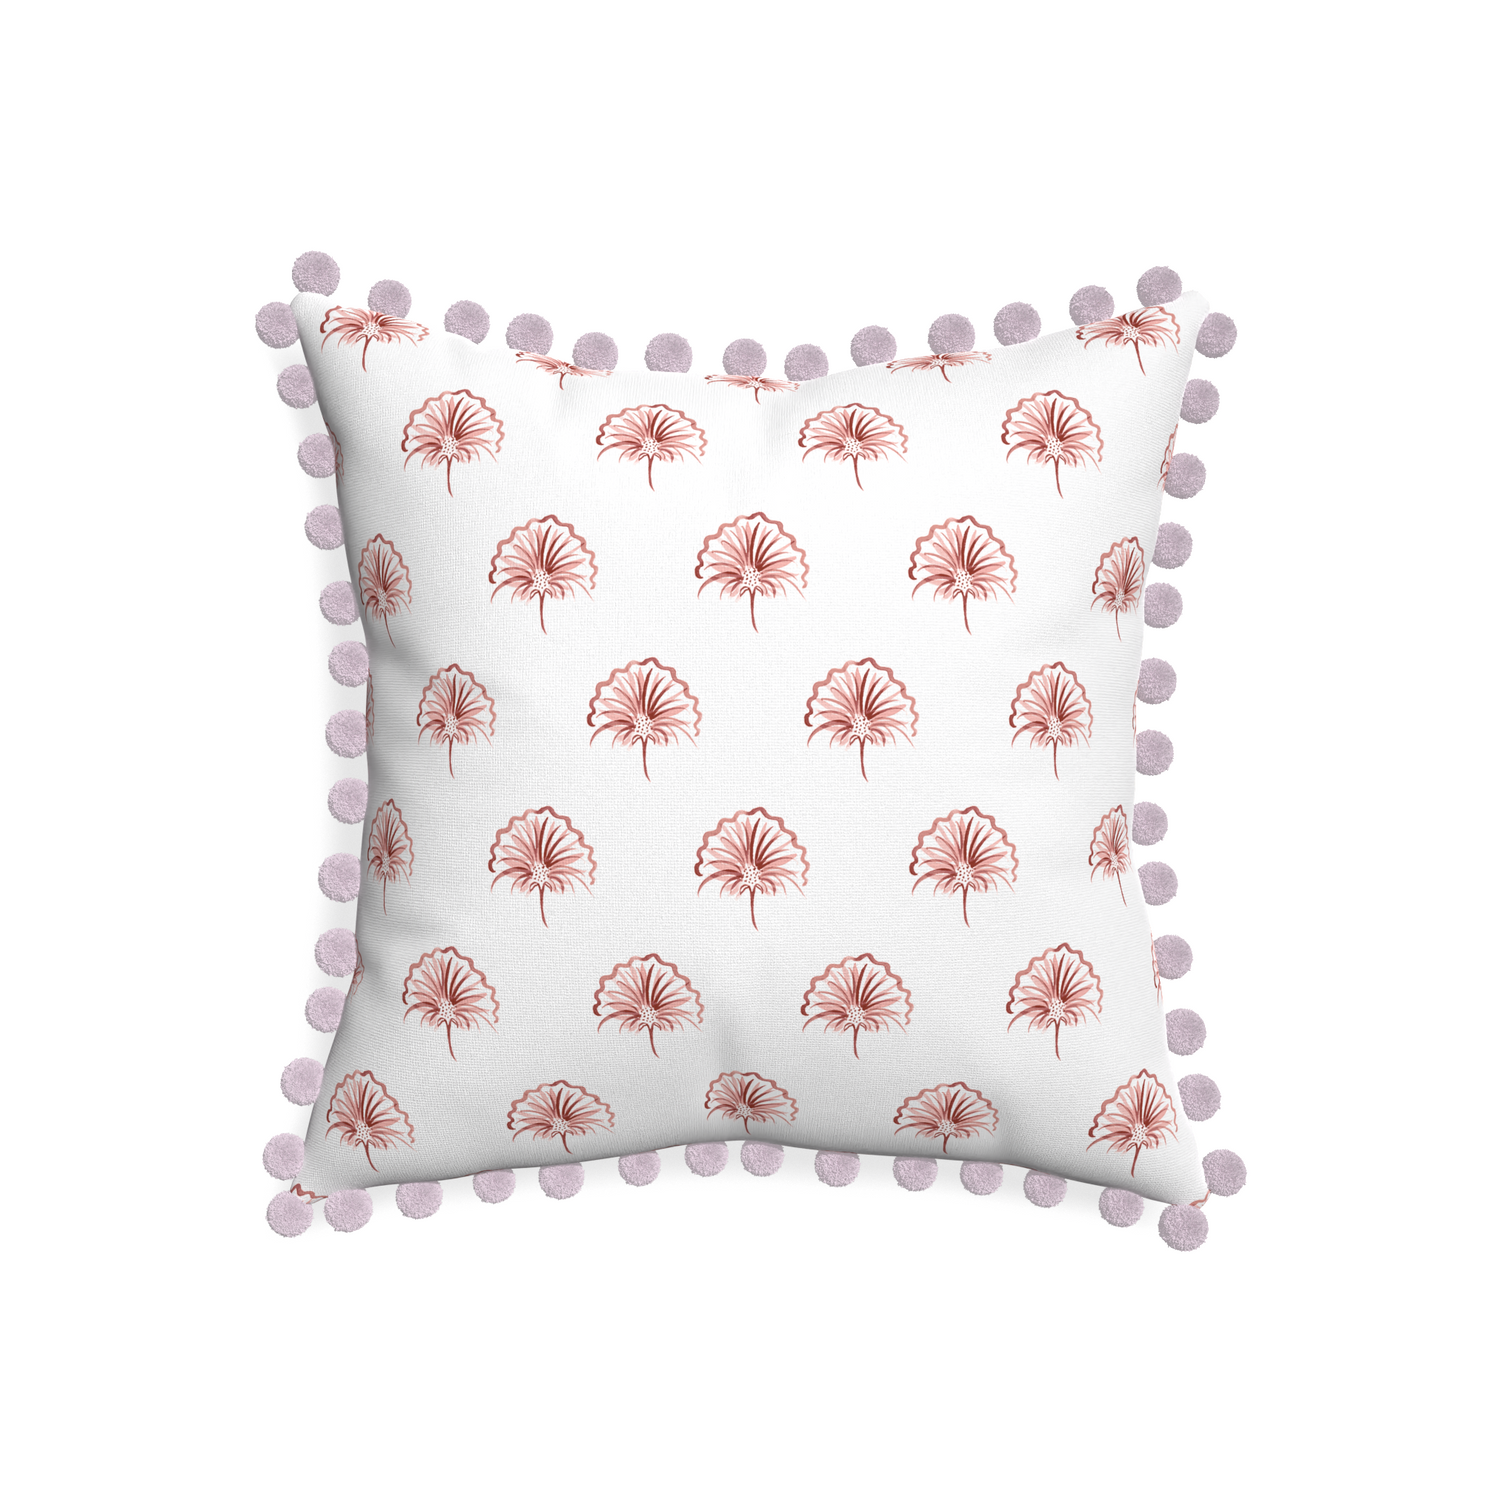 20-square penelope rose custom pillow with l on white background